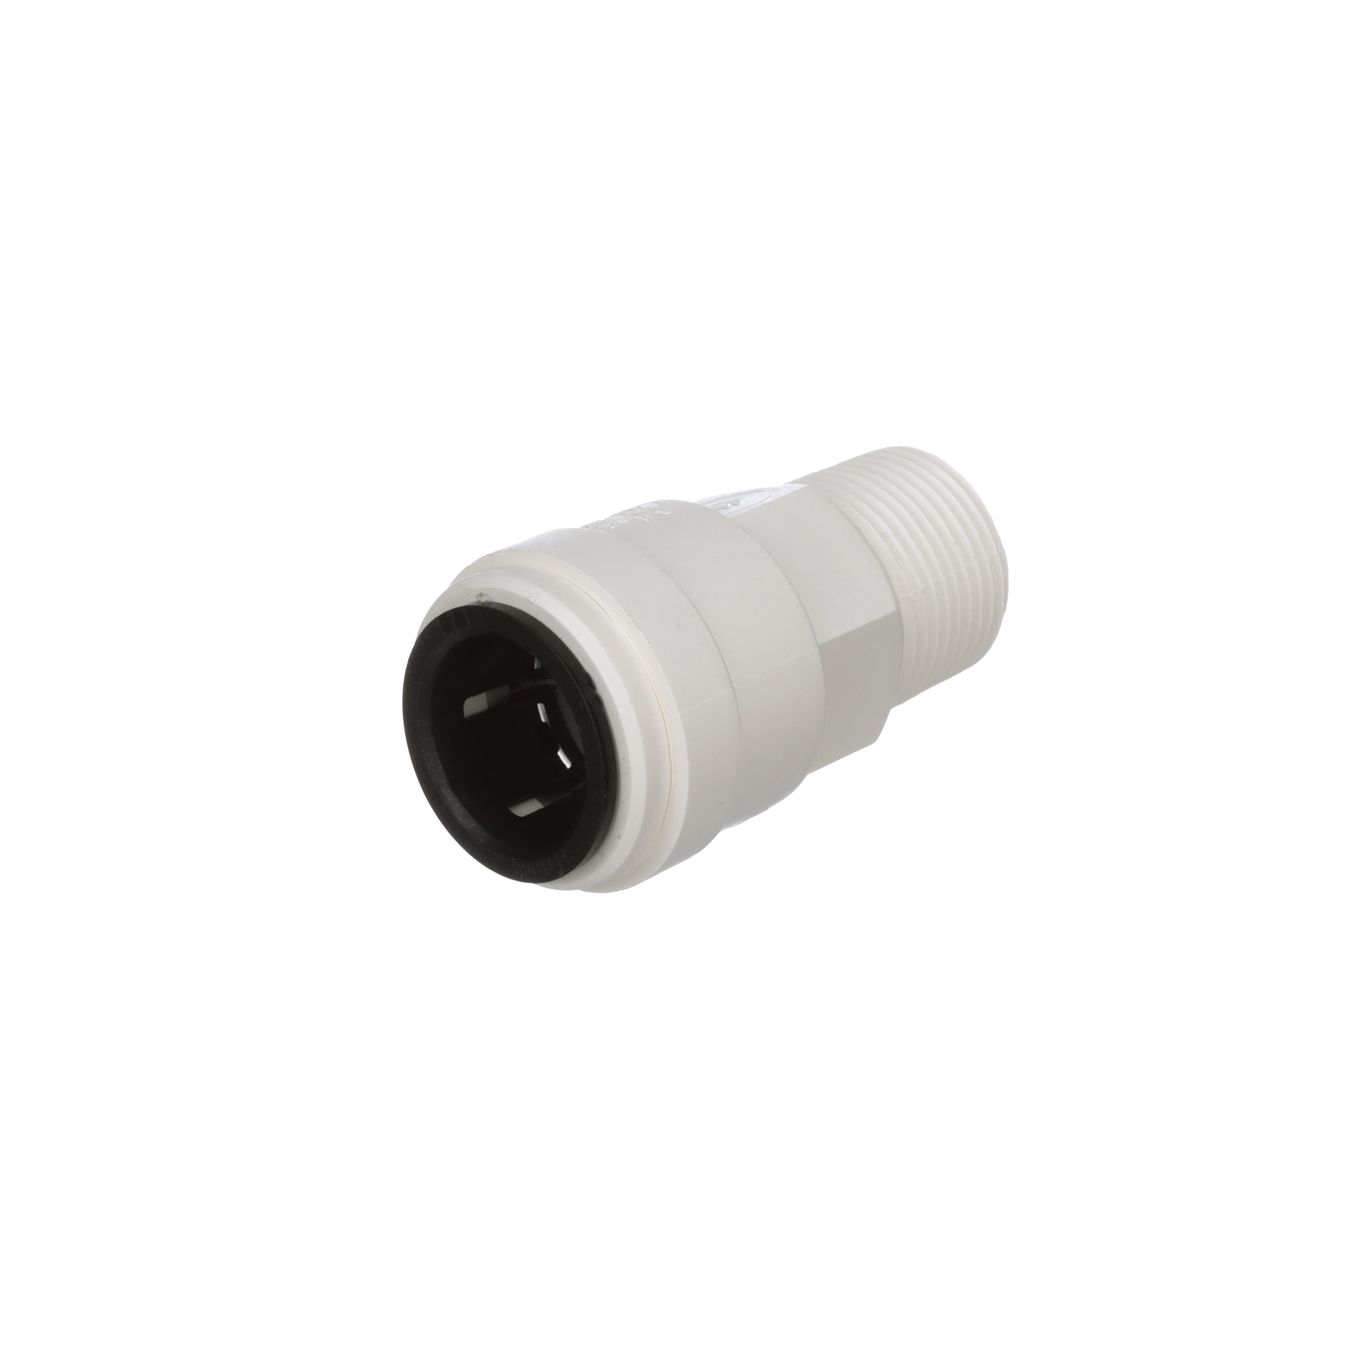 Male Adapter, 3/4 Inch CTS, 3/4 Inch NPT, Plastic